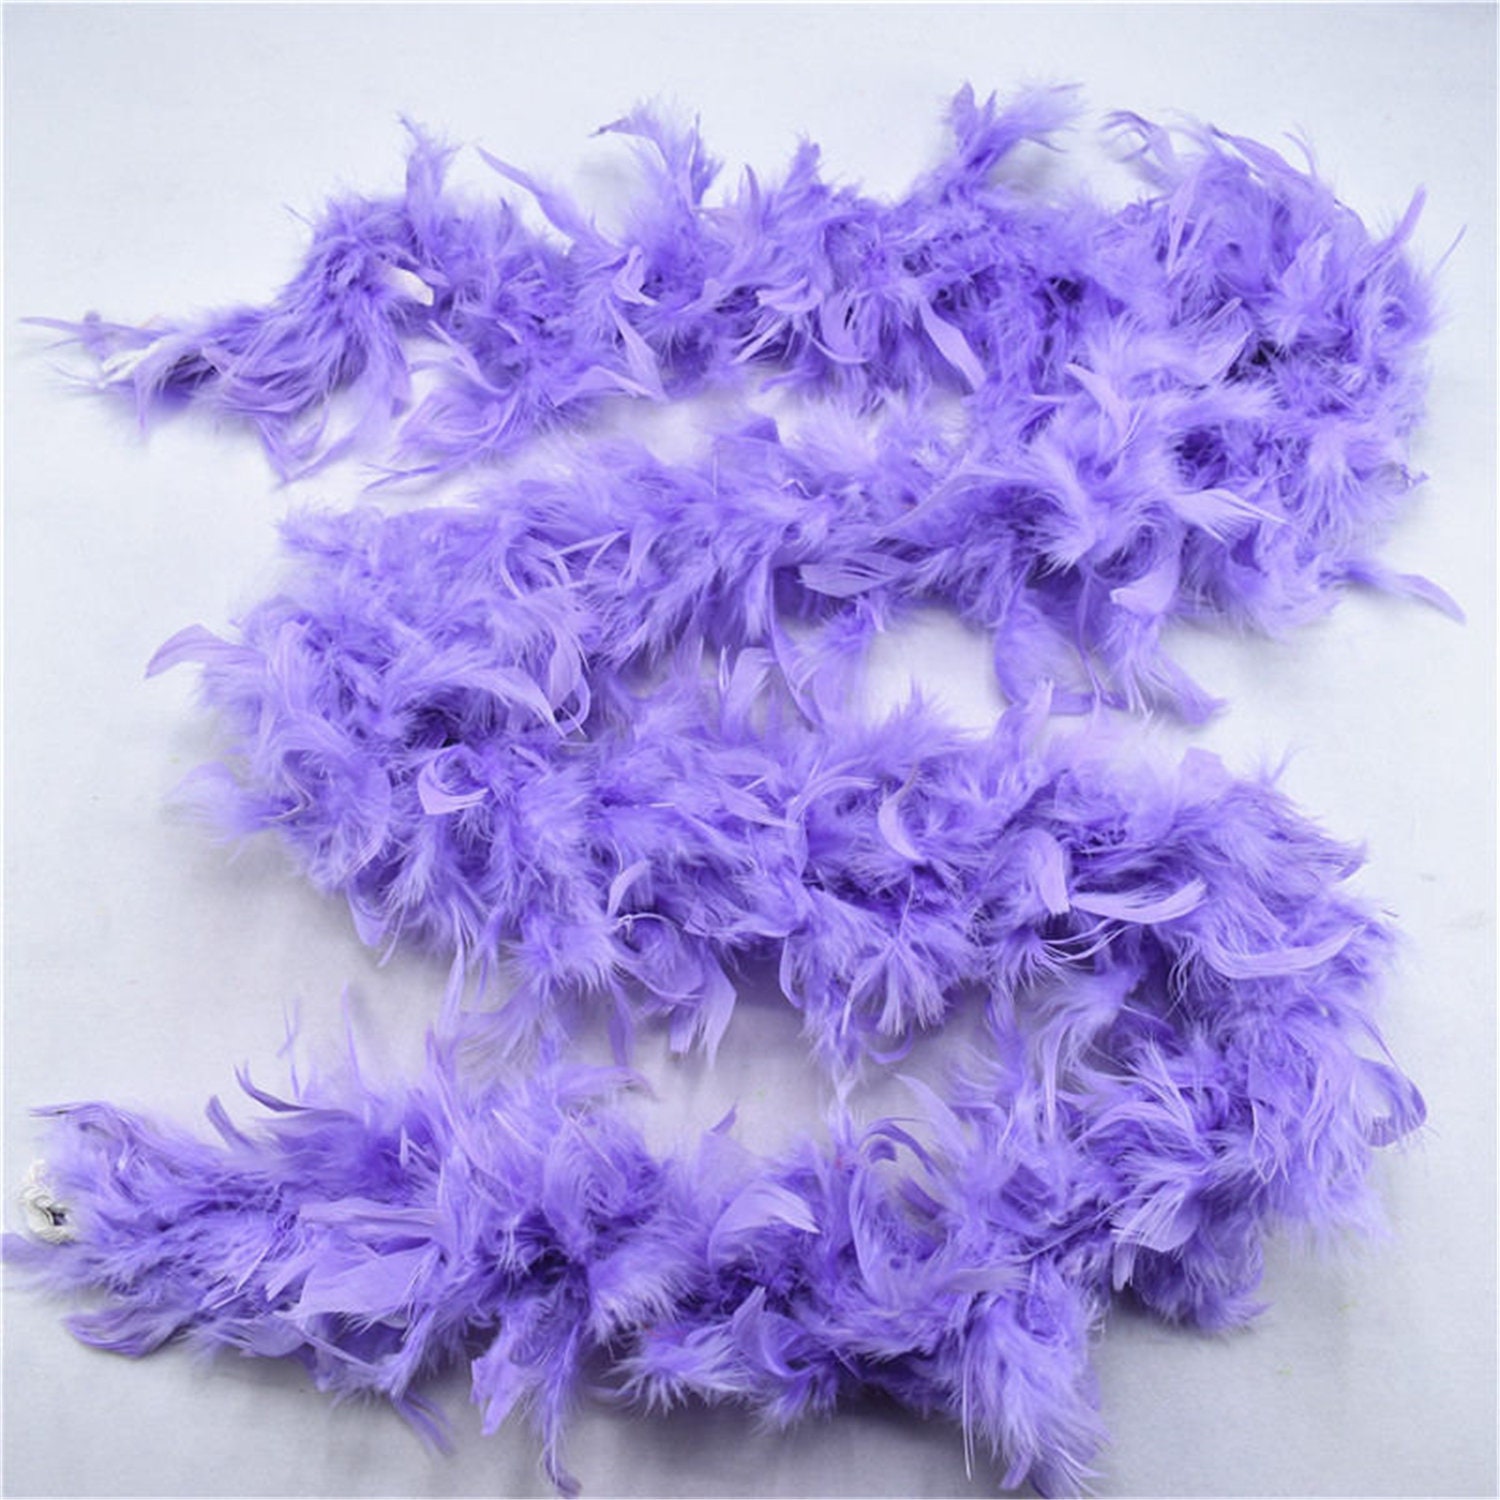 Holmgren Purple Feather Boas for Party - 2 Pcs 25g 2 Yards Feather Boa for Women and DIY Craft Sewing Clothing, Home Wedding Party Decoration (Light